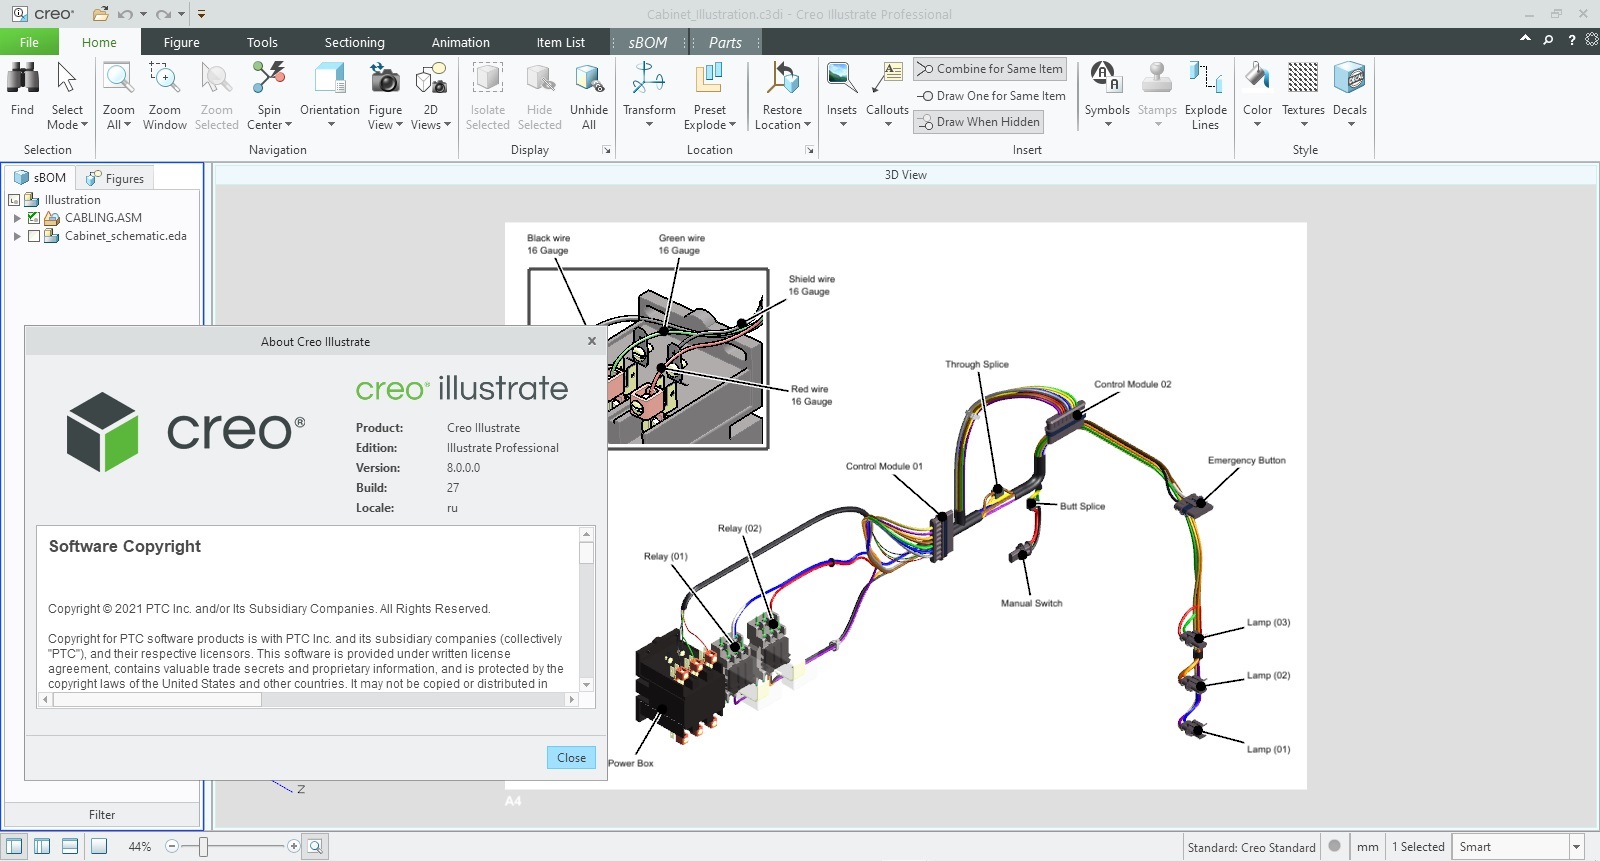 Working with PTC Creo Illustrate 8.0.0.0 full